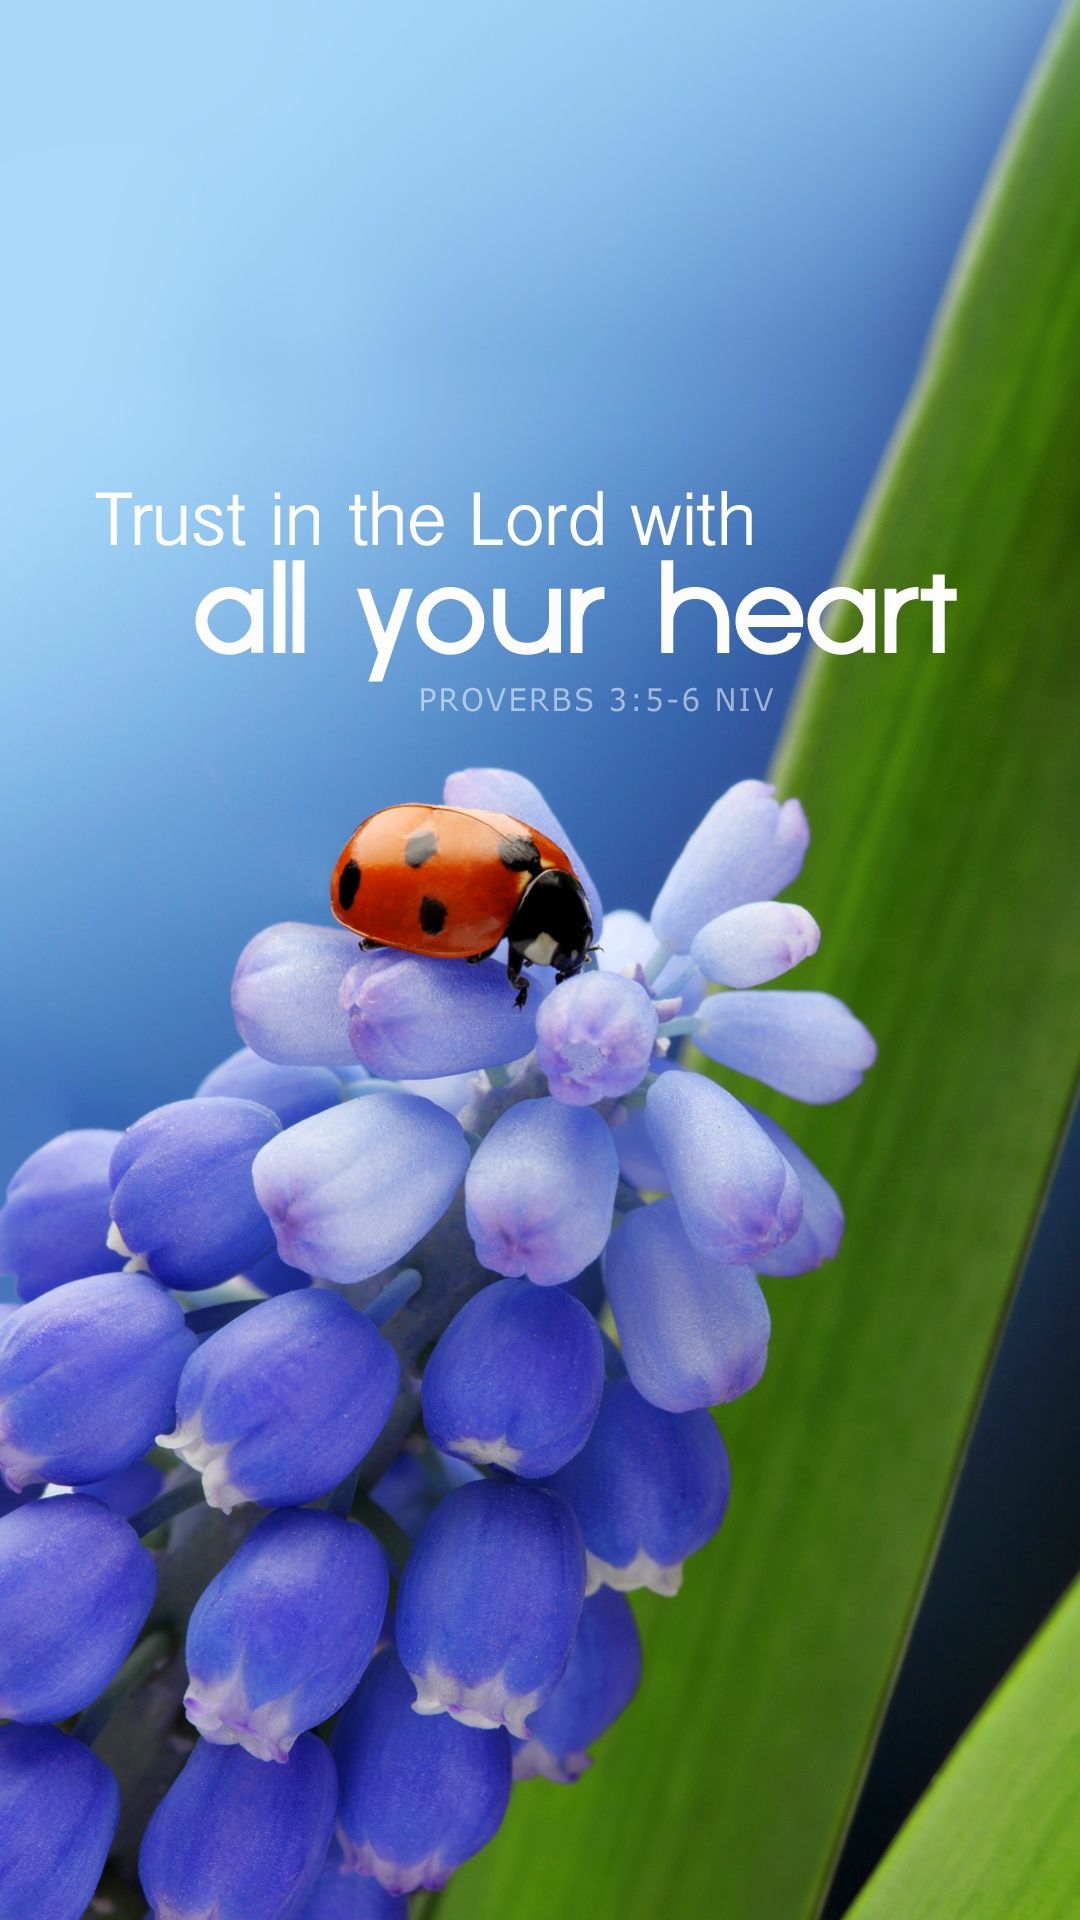 Trust In The Lord Wallpaper. Lord Of The Rings Wallpaper, Star Lord Mask Wallpaper And Lord Angel Wallpaper